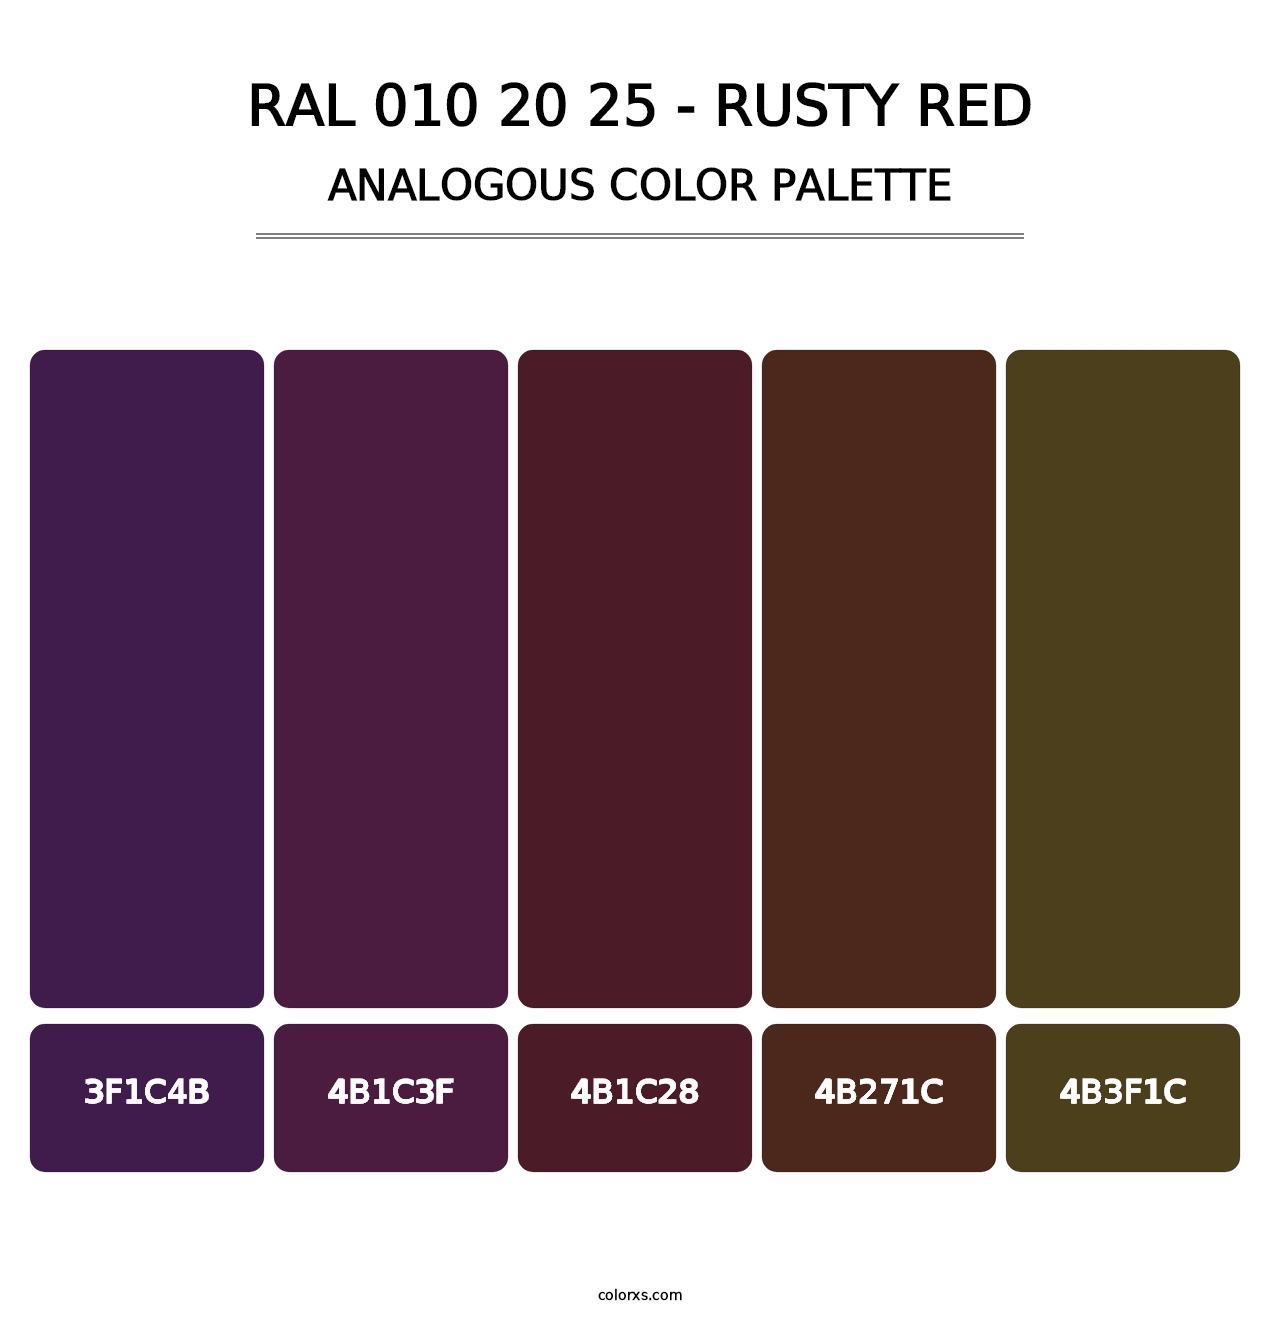 RAL 010 20 25 - Rusty Red - Analogous Color Palette